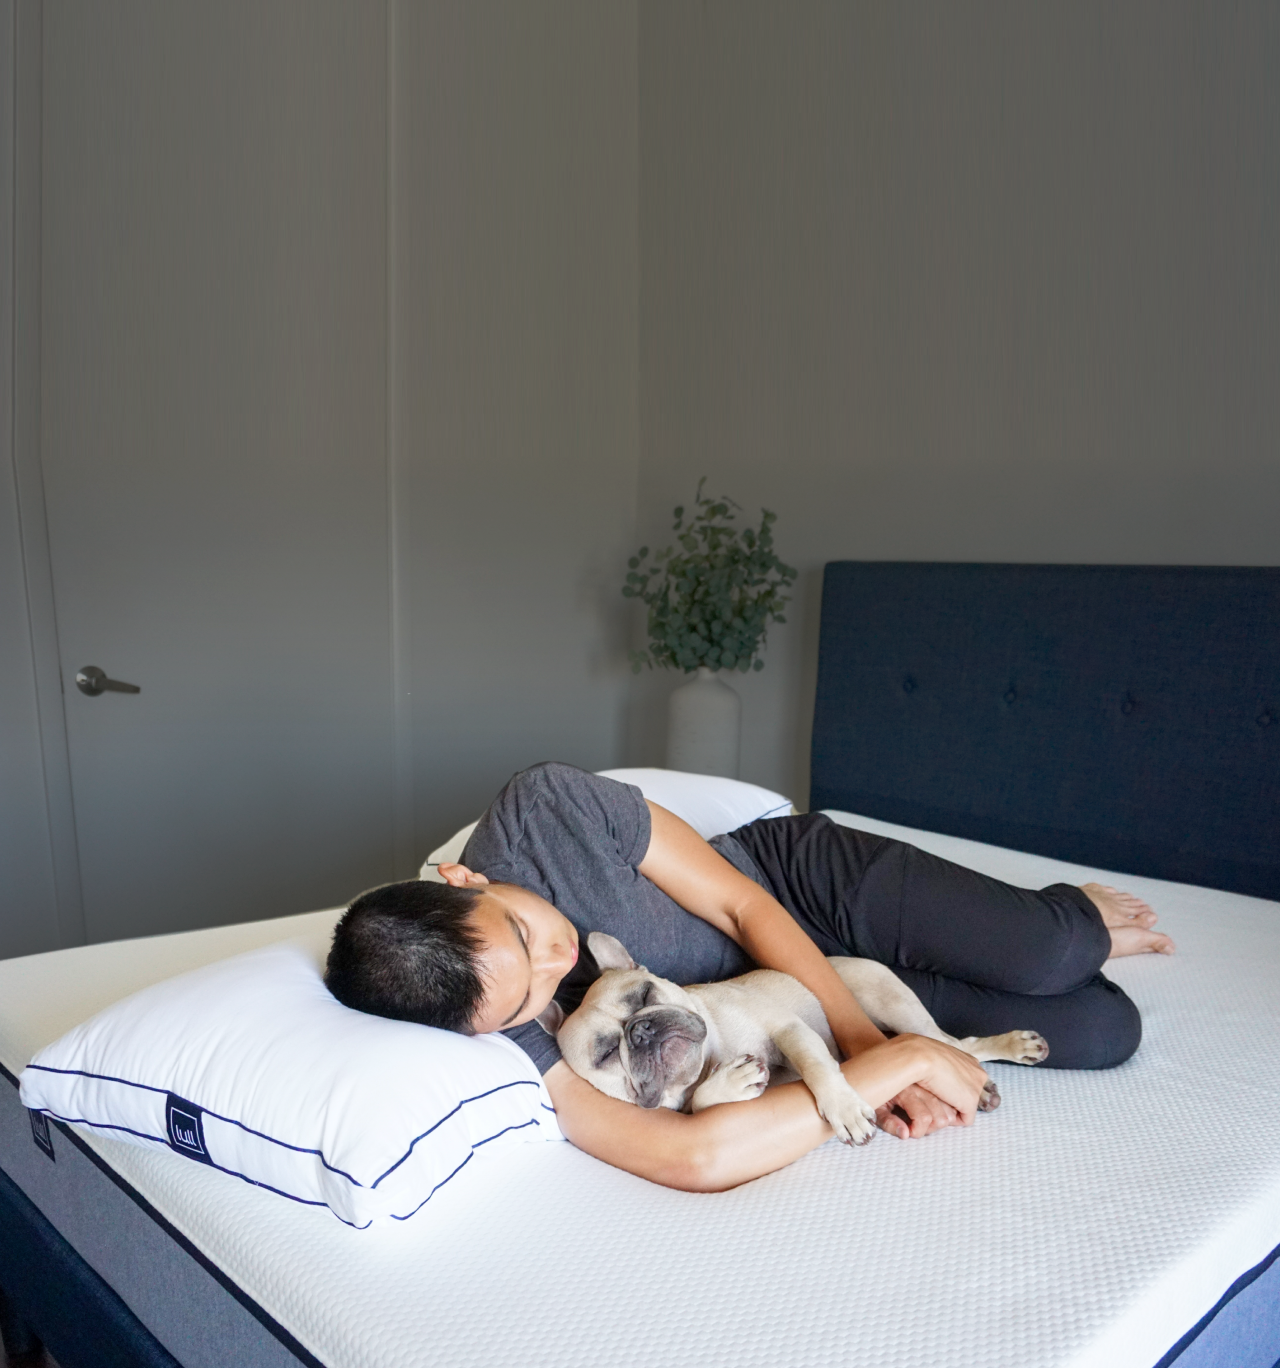 A man and his dog asleep on a lull mattress and pillow.